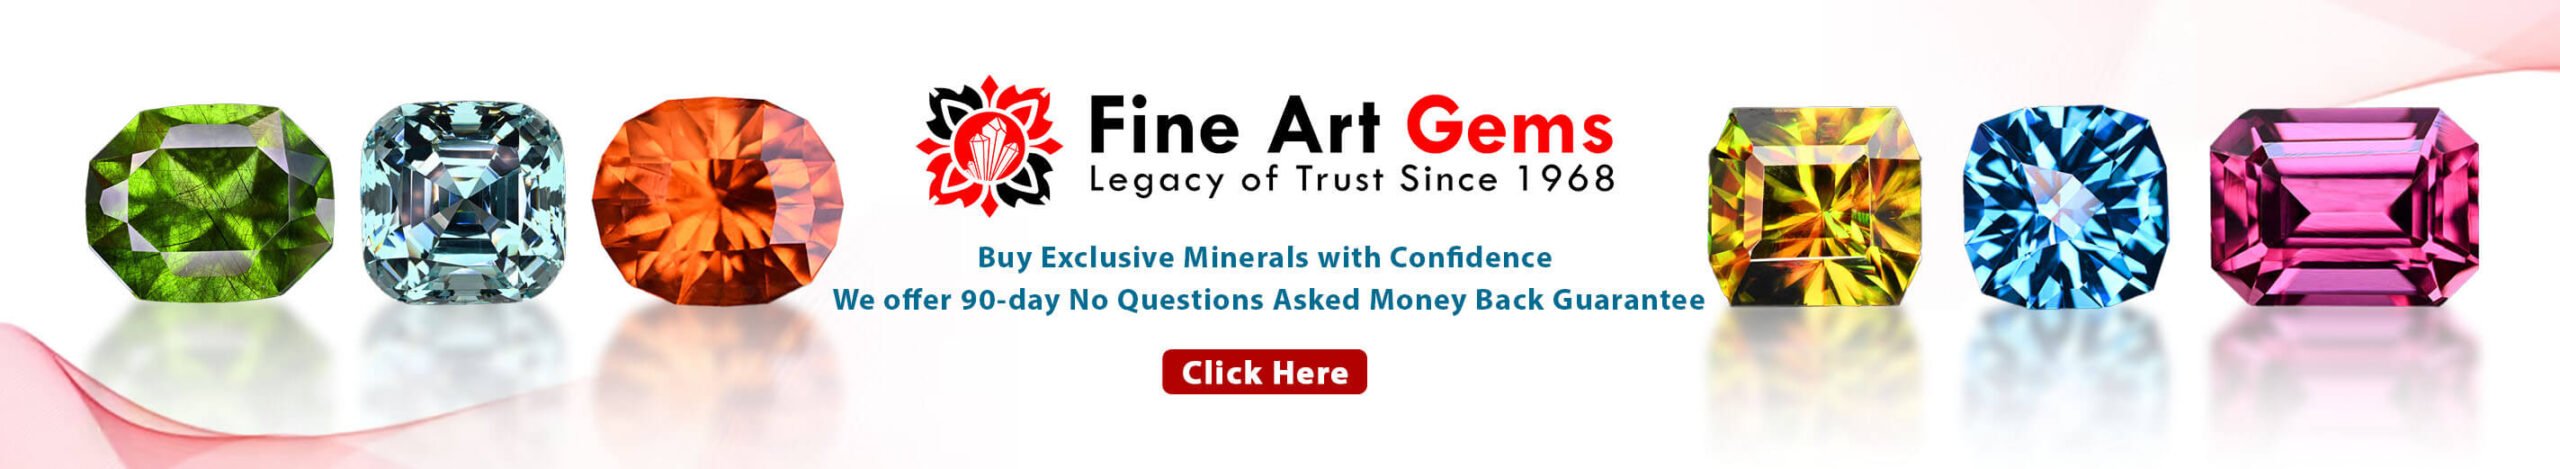 FAG Mid Banner For Minerals 1366,250 (1)